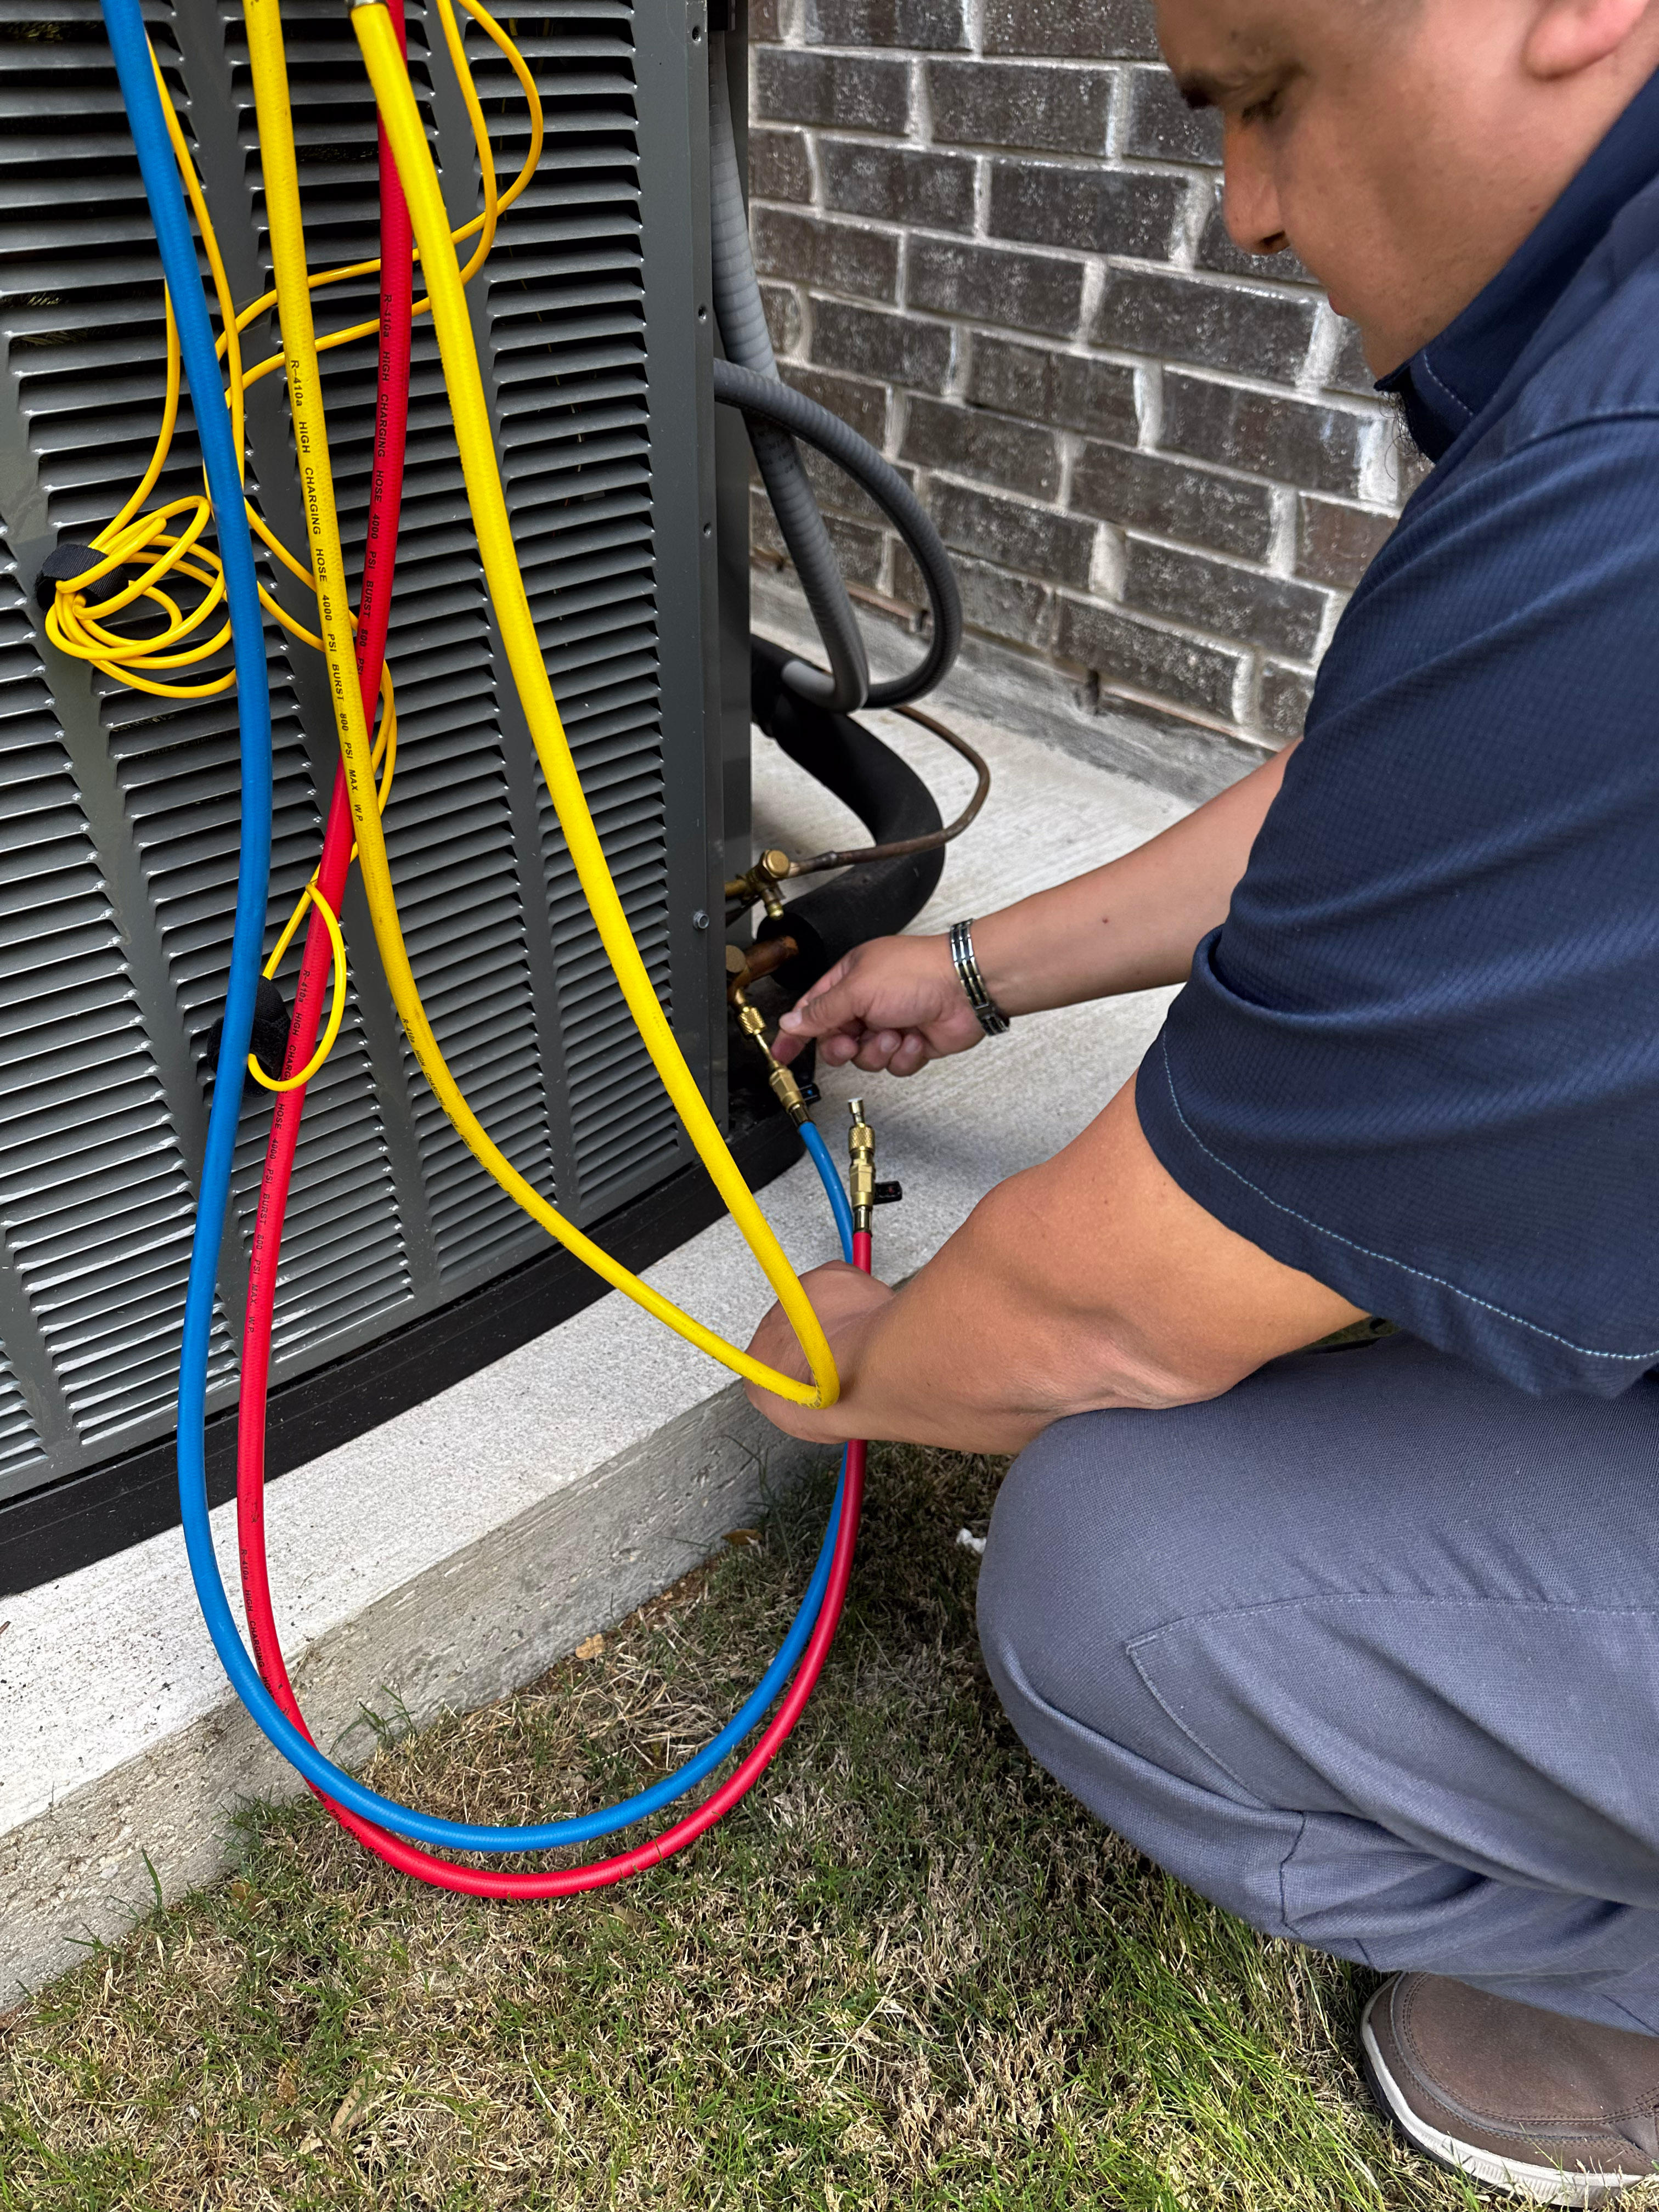 Climate control employee installing new system outside